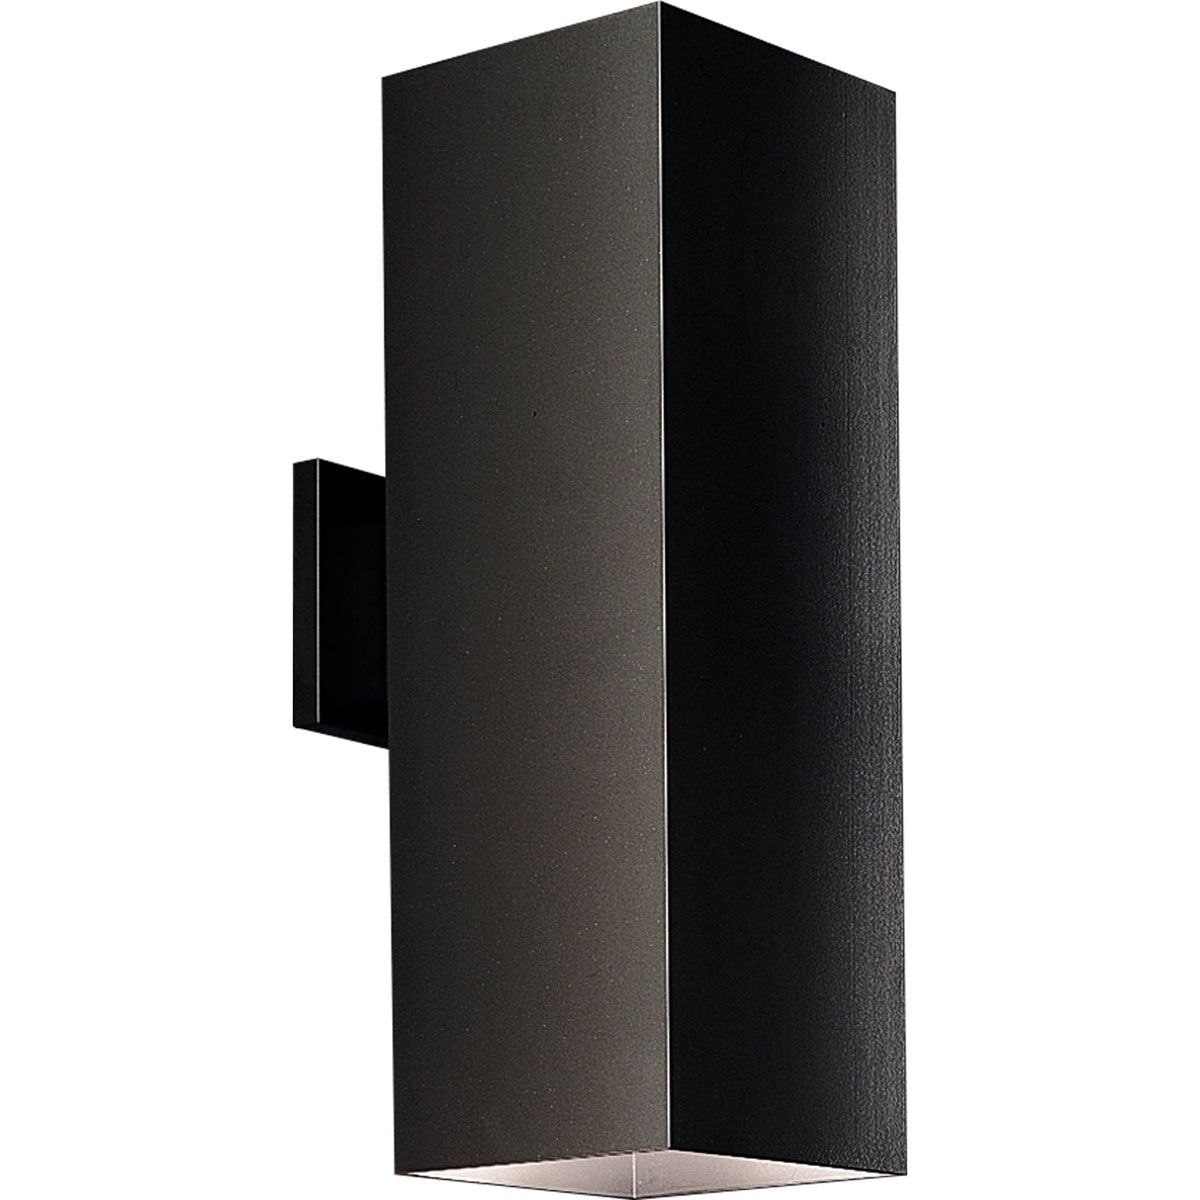 Down Square Outdoor Wall Lightprogress Lighting | P5644 31 With Regard To Outdoor Wall Sconce Up Down Lighting (View 12 of 15)